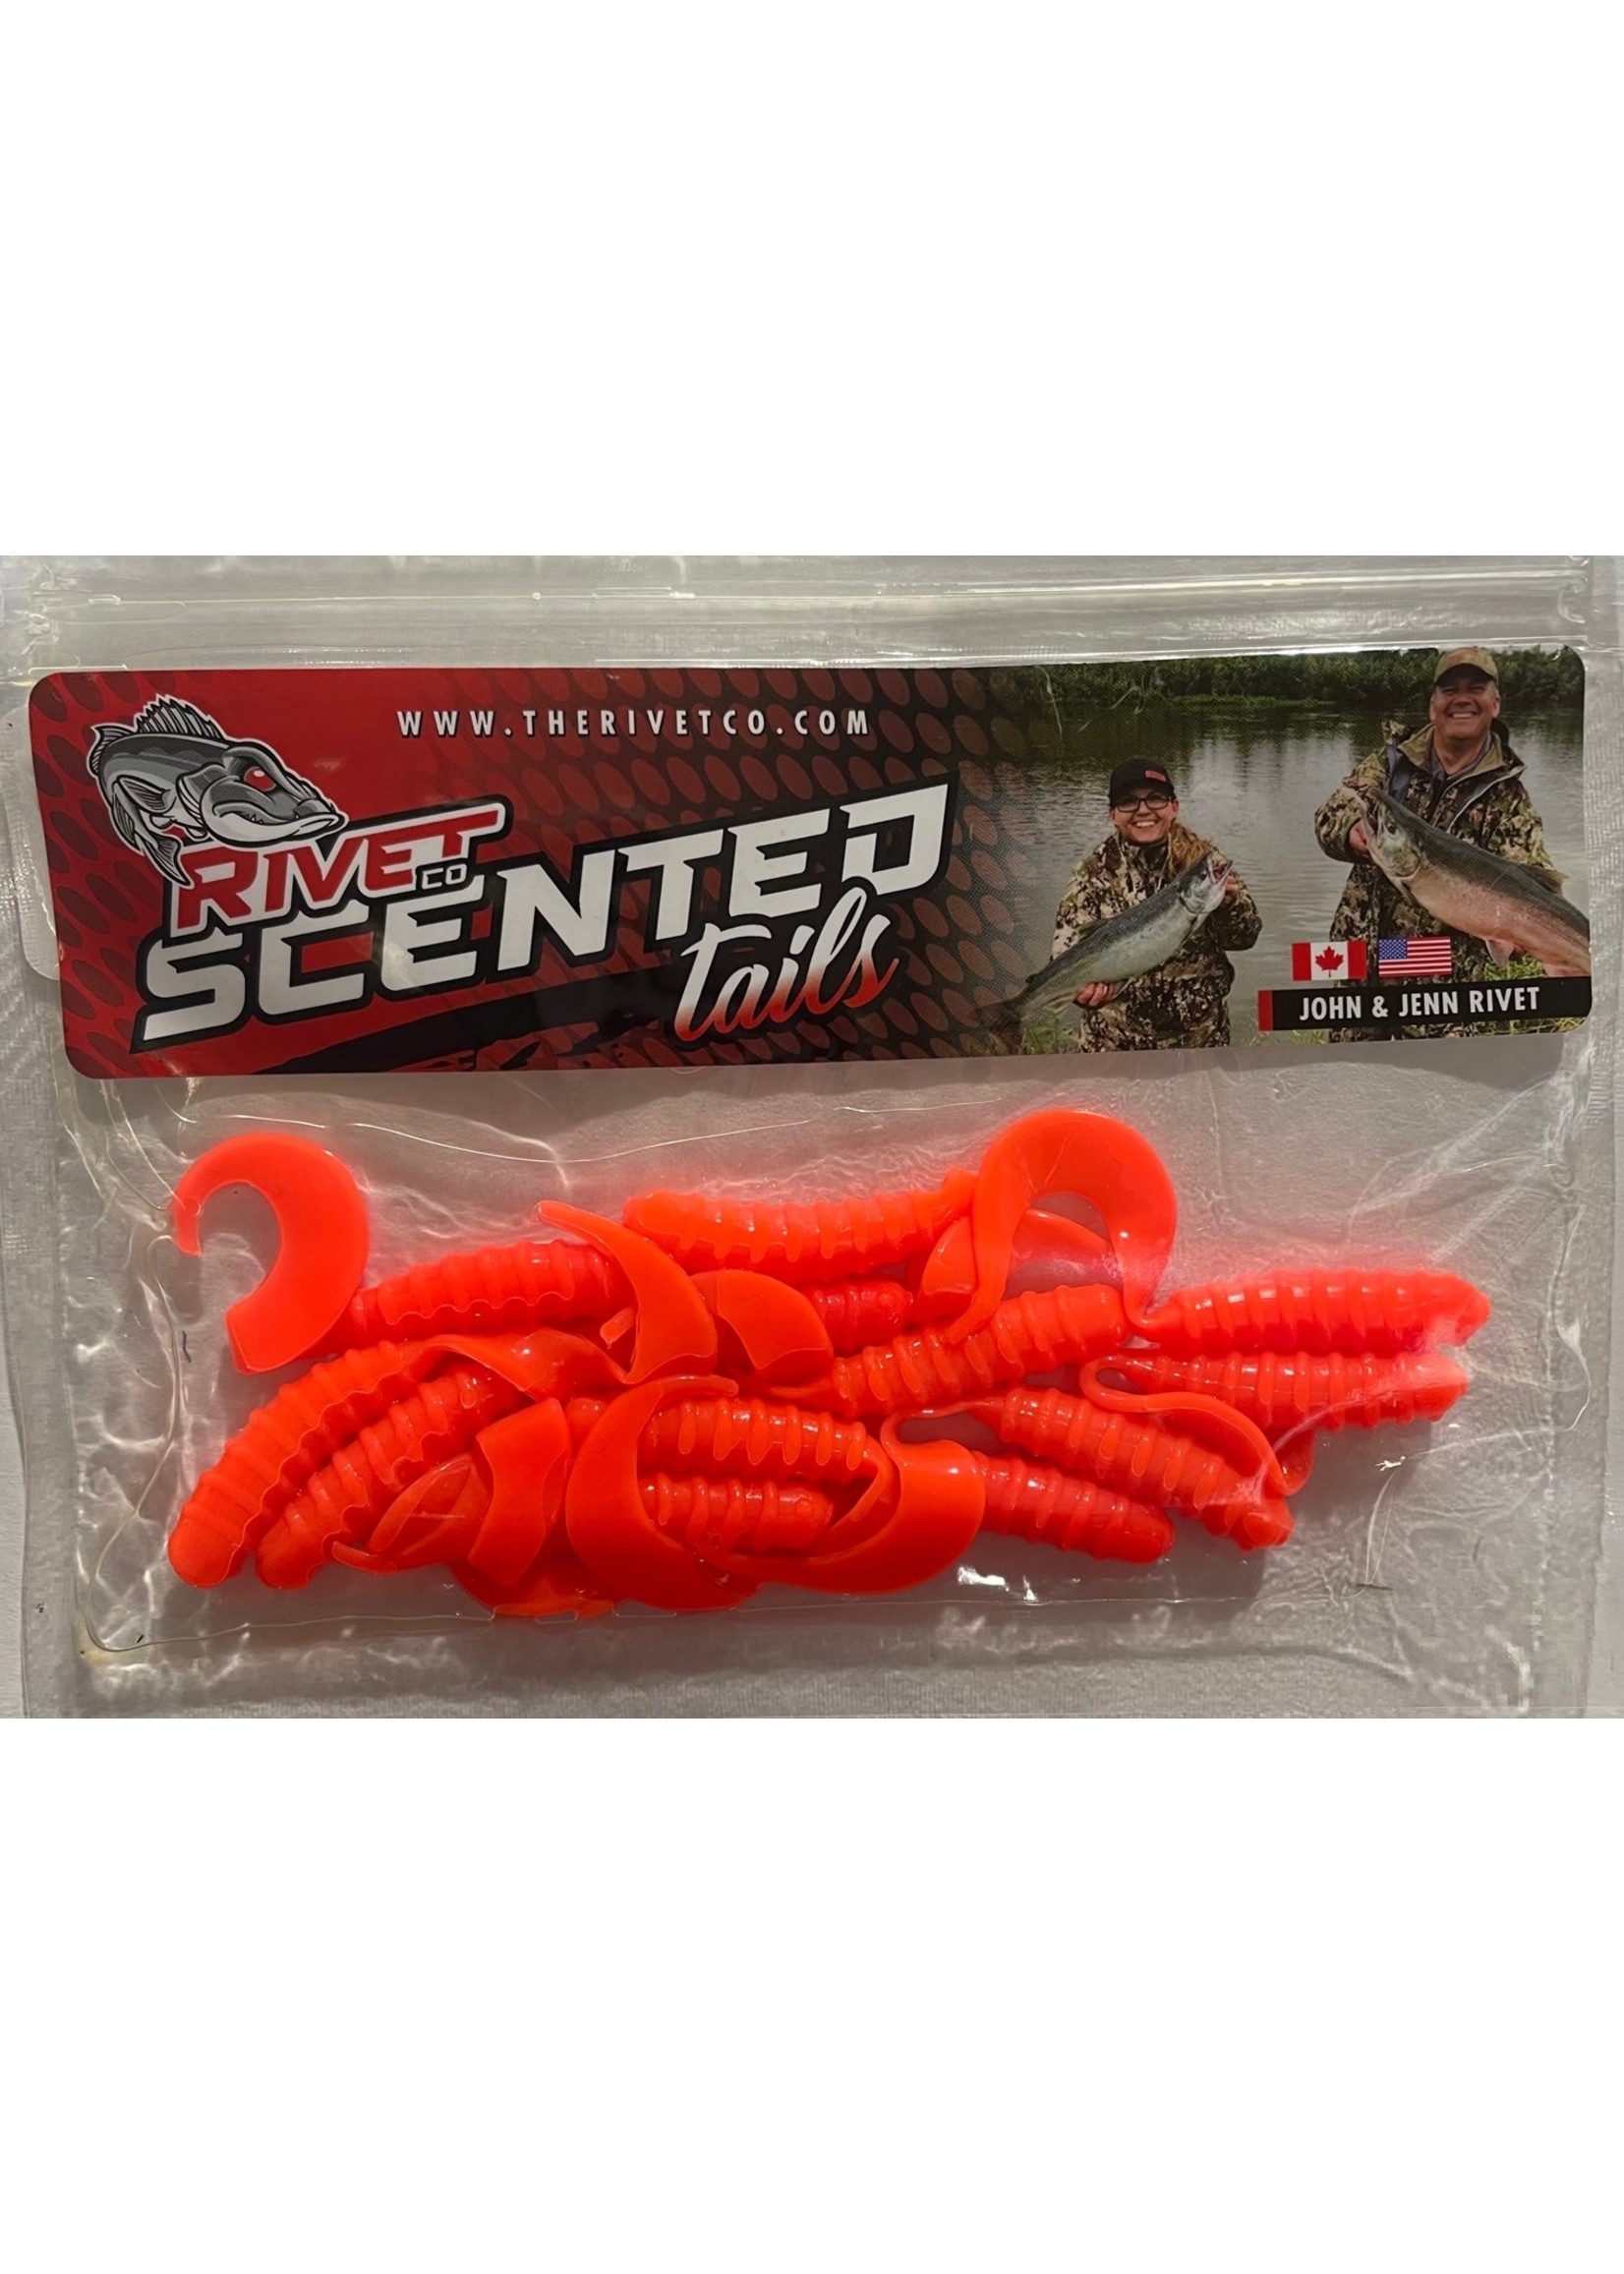 THE RIVET CO THE RIVET CO. SCENTED TAILS CURL TAIL 3"